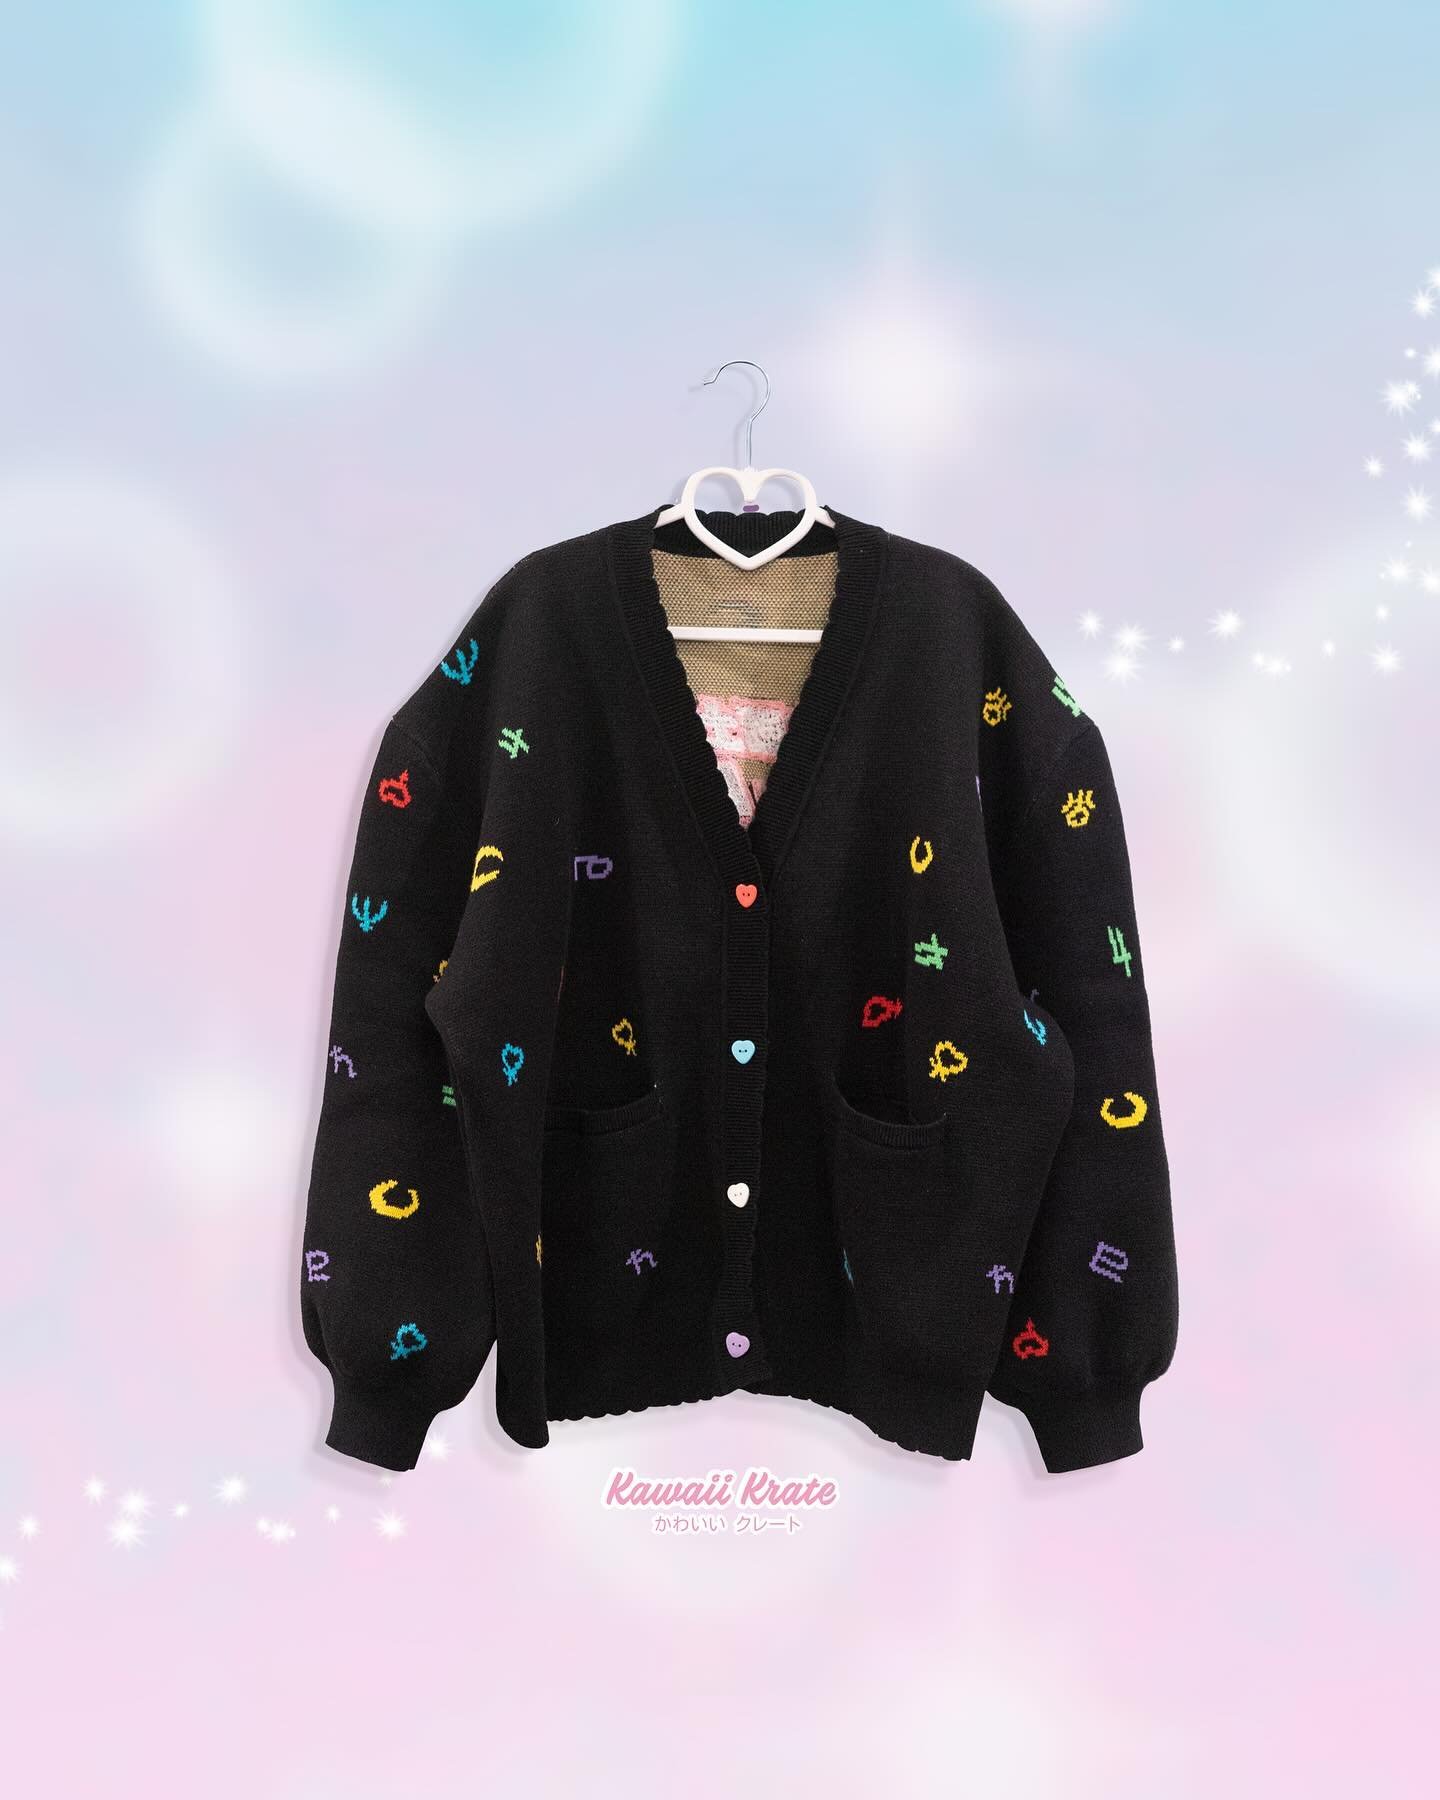 The Pretty Senshi Cardigan 💖
LOOOOOOVEEEE this cardigan design! For all my moonies that want a little subtle but also want to show so love for their favorite nostalgic anime! I came across someone that visited my booth in Anime Las Vegas that had a 